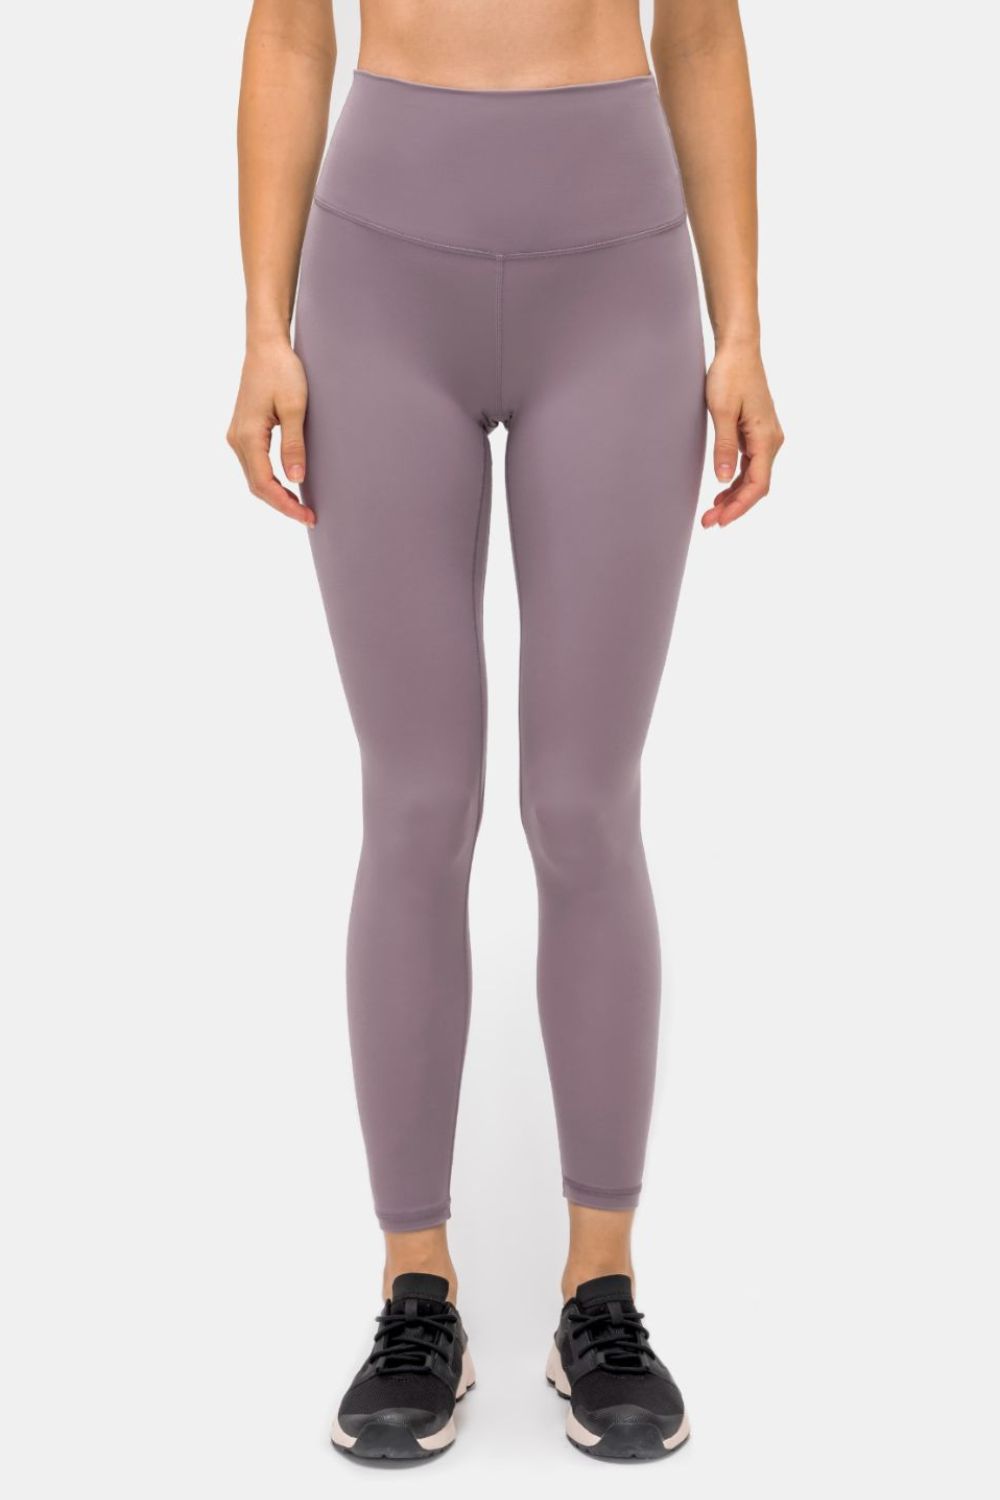 Invisible Pocket Sports Leggings - Dusty Pink / 4 - fashion